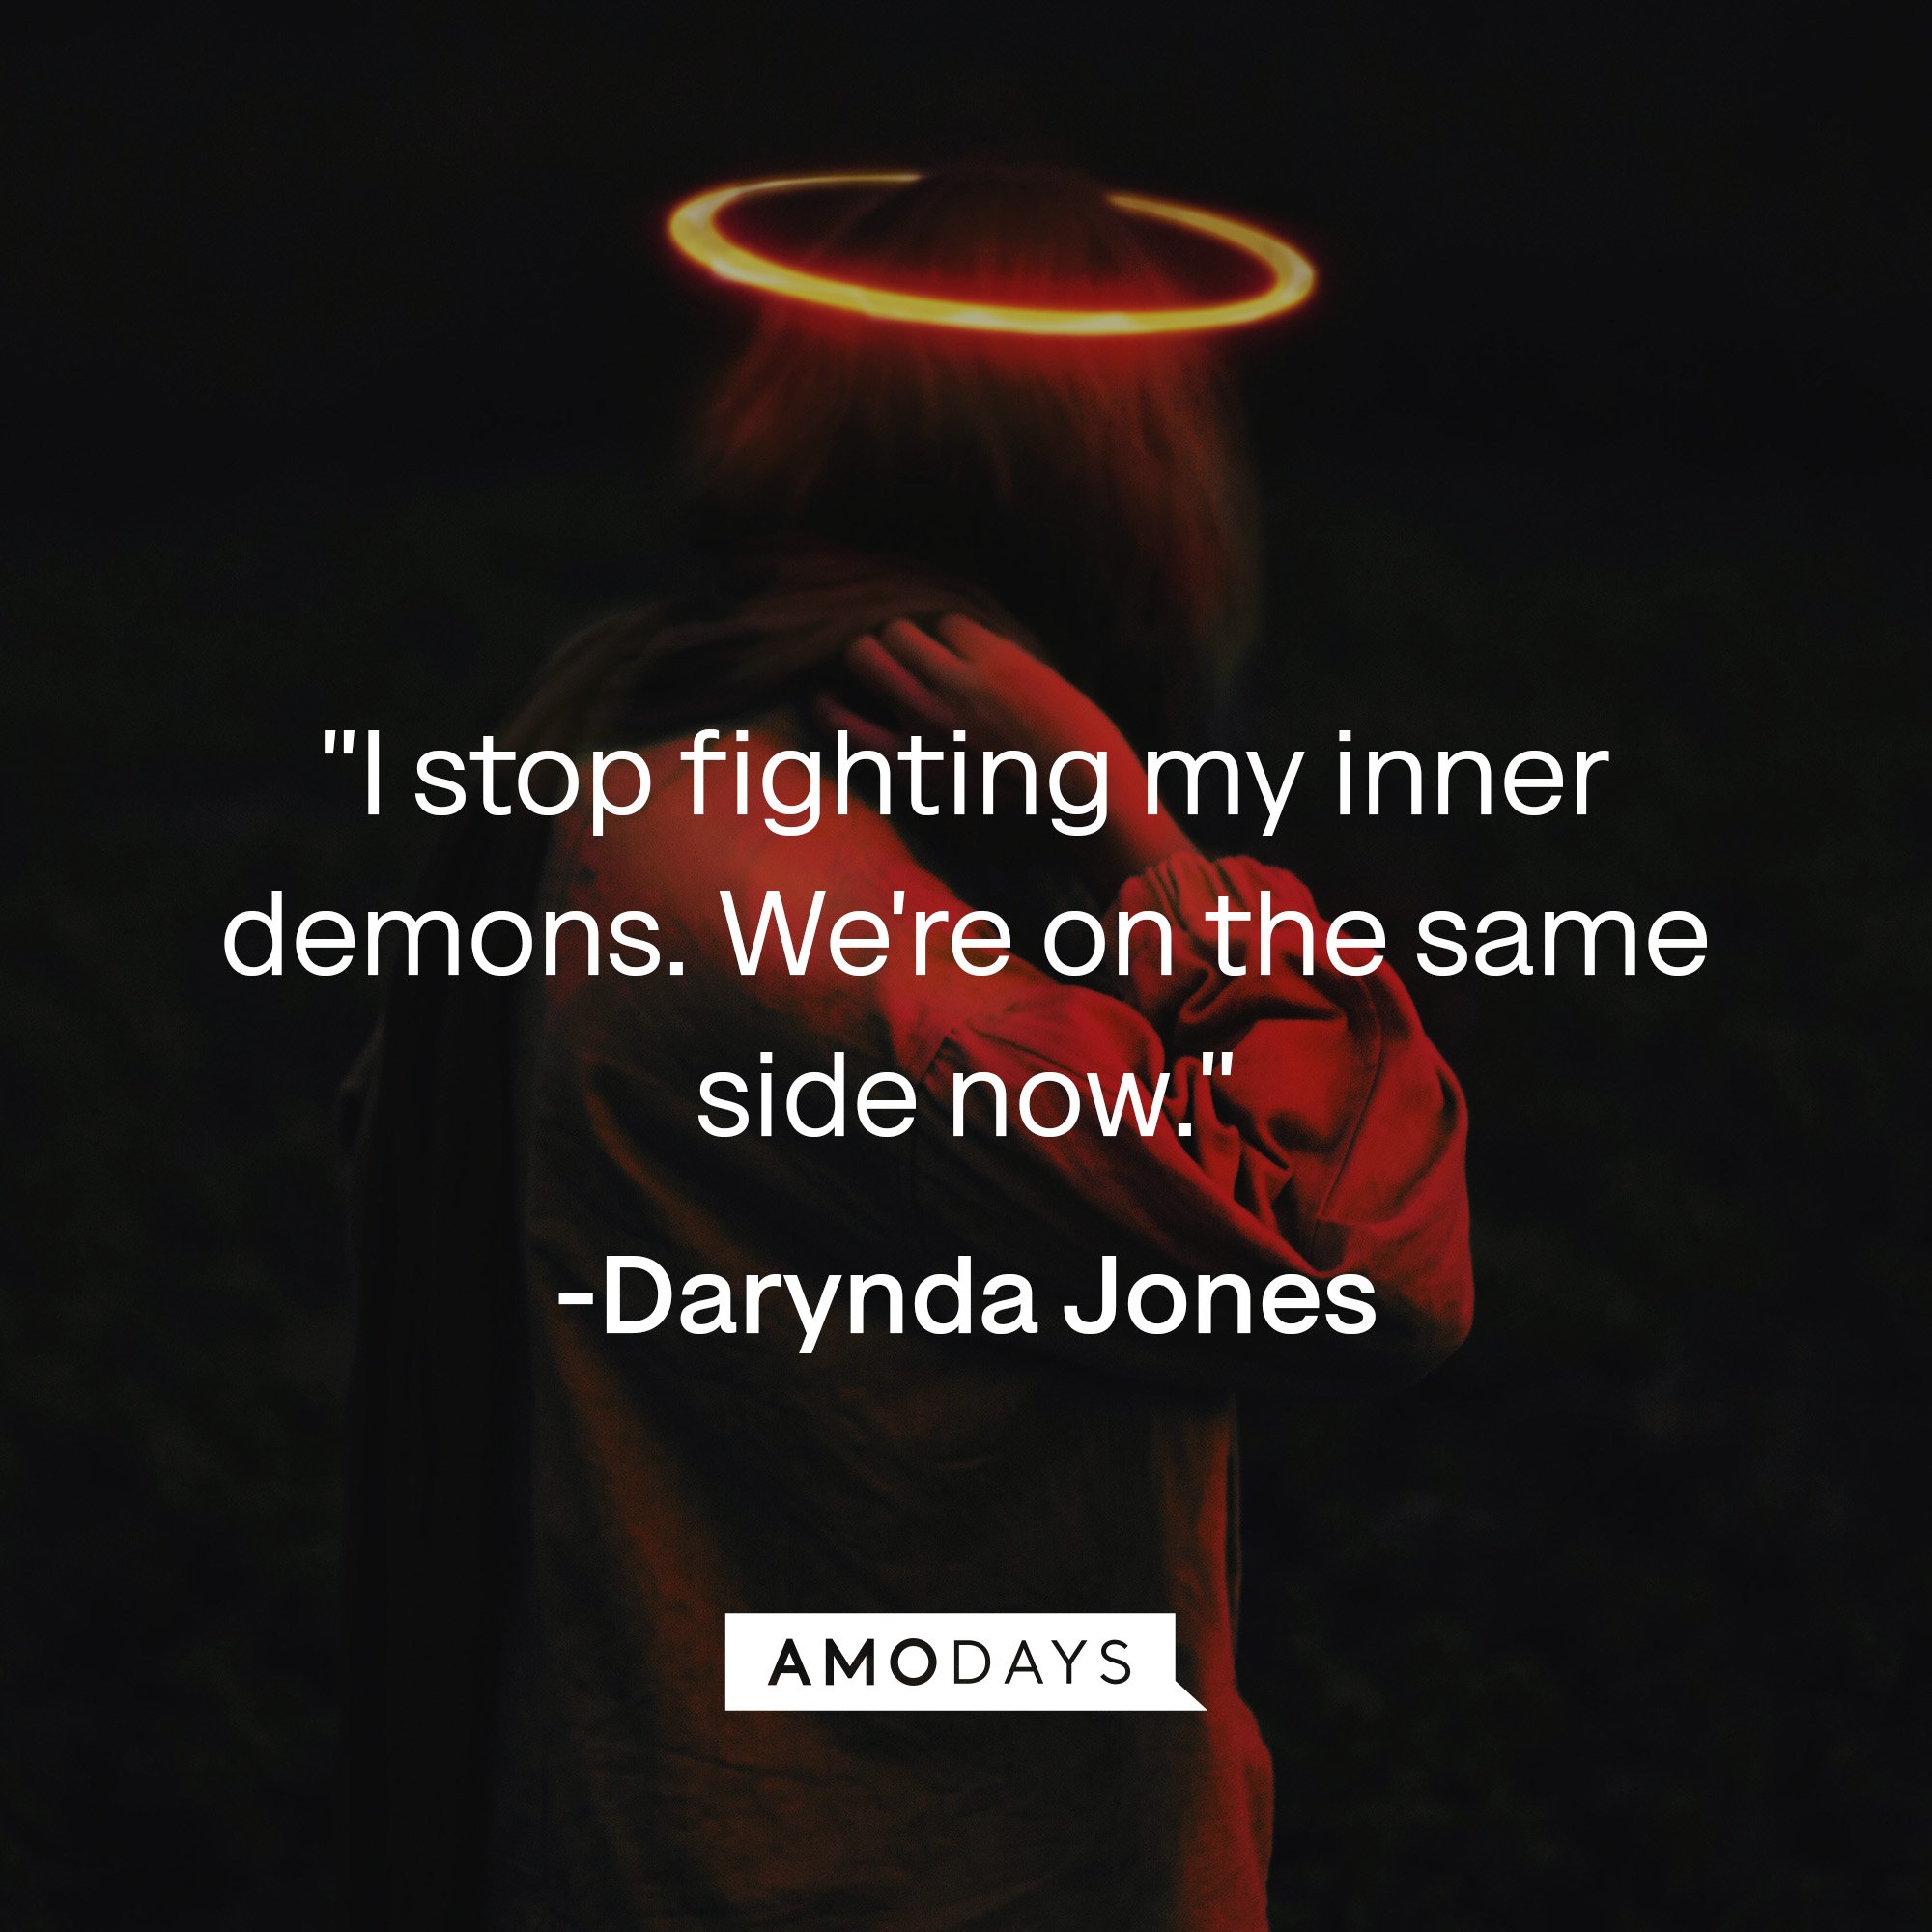 Darynda Jones’ quote: "I stop fighting my inner demons. We're on the same side now." | Image: AmoDays